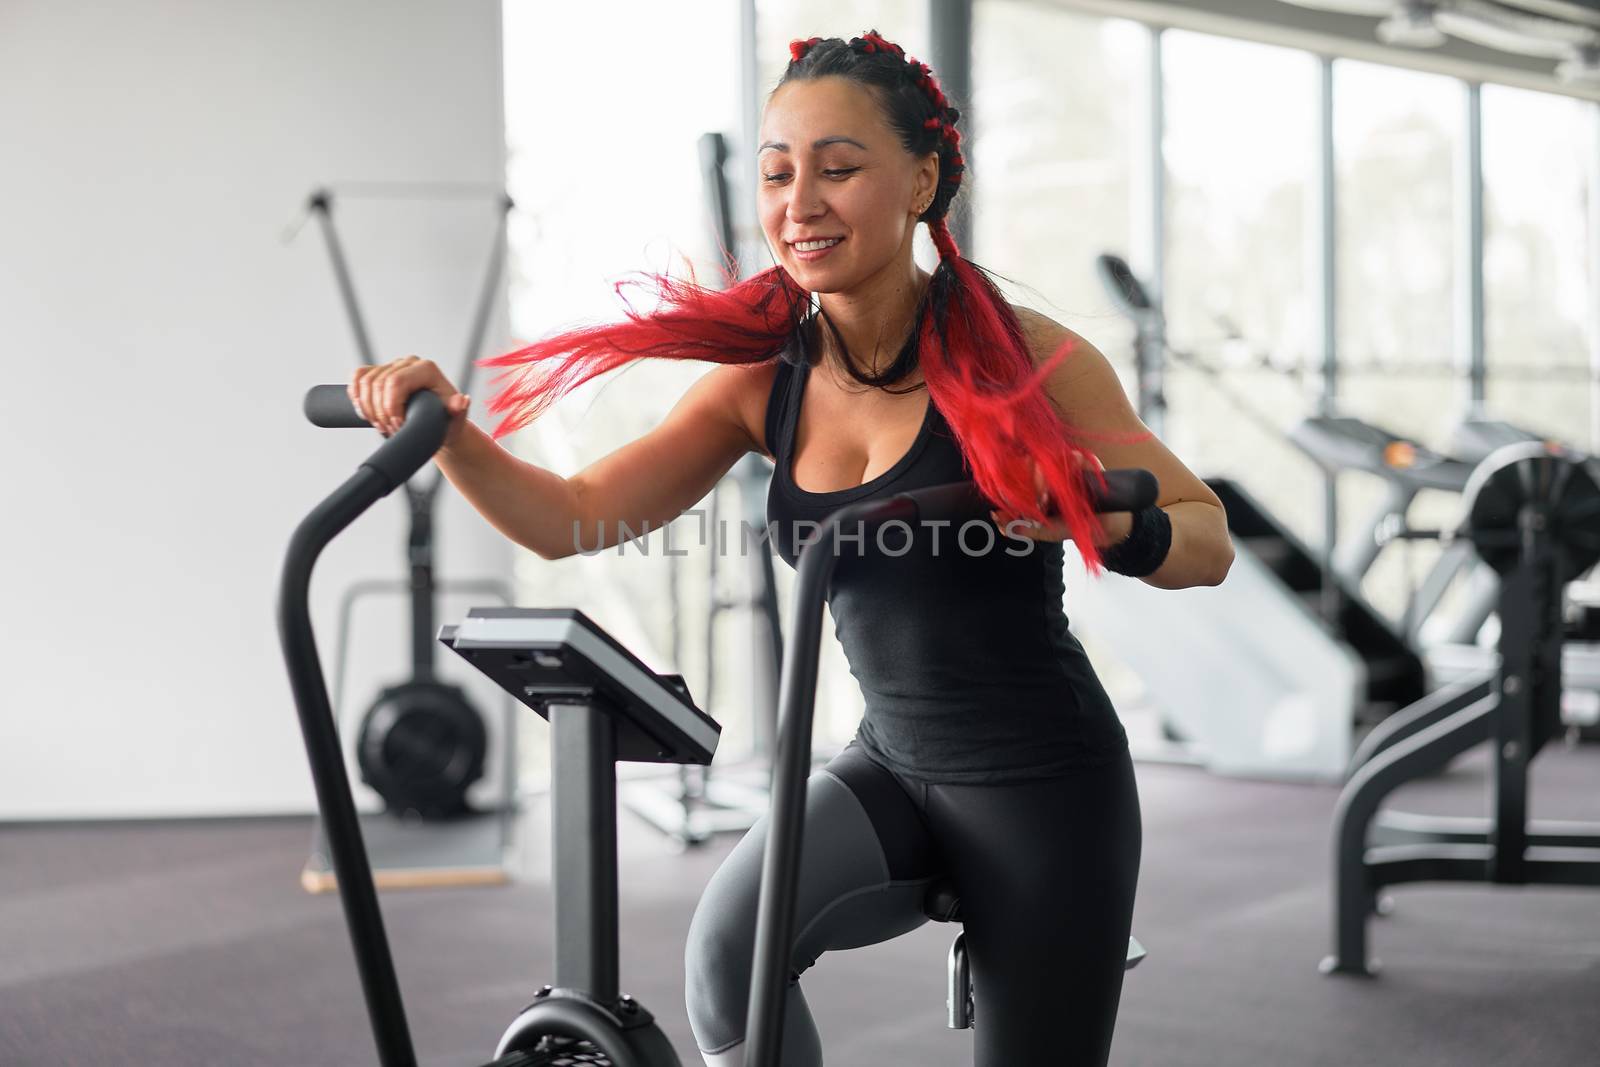 Woman exercise bike gym cycling training fitness. Fitness female using air bike cardio workout. Athlete girl sportswear biking indoor gym exercising his legs. Cross functional training.